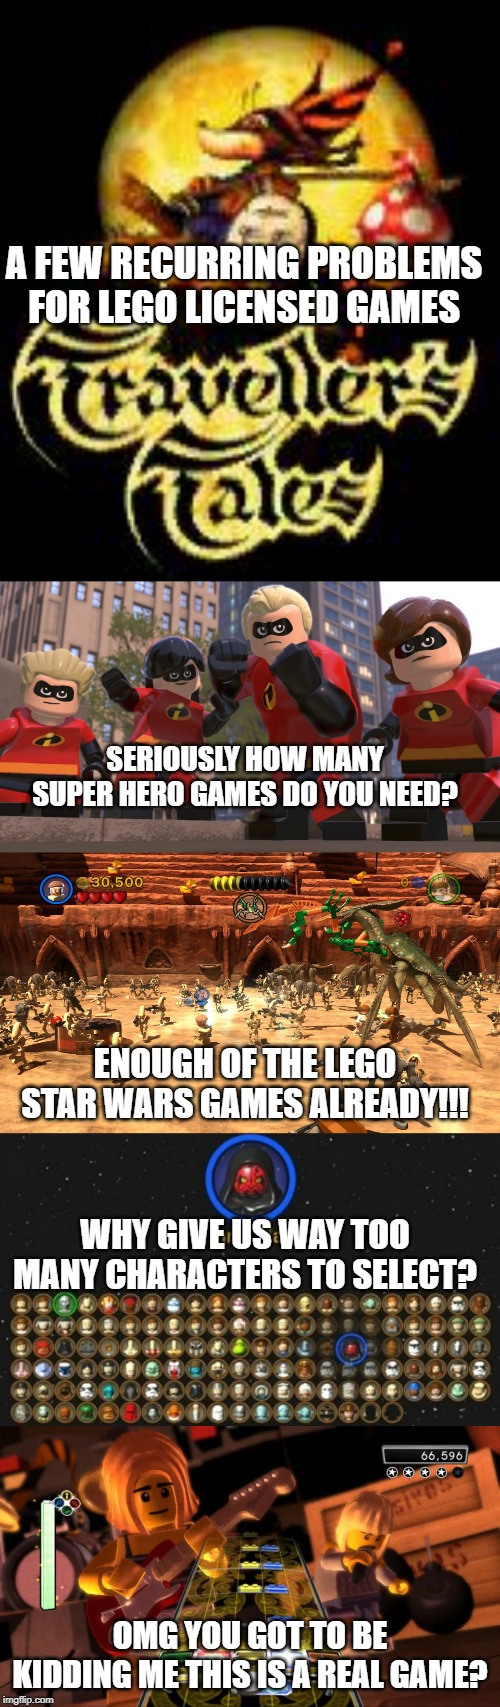 A FEW RECURRING PROBLEMS FOR LEGO LICENSED GAMES; SERIOUSLY HOW MANY SUPER HERO GAMES DO YOU NEED? ENOUGH OF THE LEGO STAR WARS GAMES ALREADY!!! WHY GIVE US WAY TOO MANY CHARACTERS TO SELECT? OMG YOU GOT TO BE KIDDING ME THIS IS A REAL GAME? | image tagged in marvel,dc,star wars,super hero,movies,characters | made w/ Imgflip meme maker